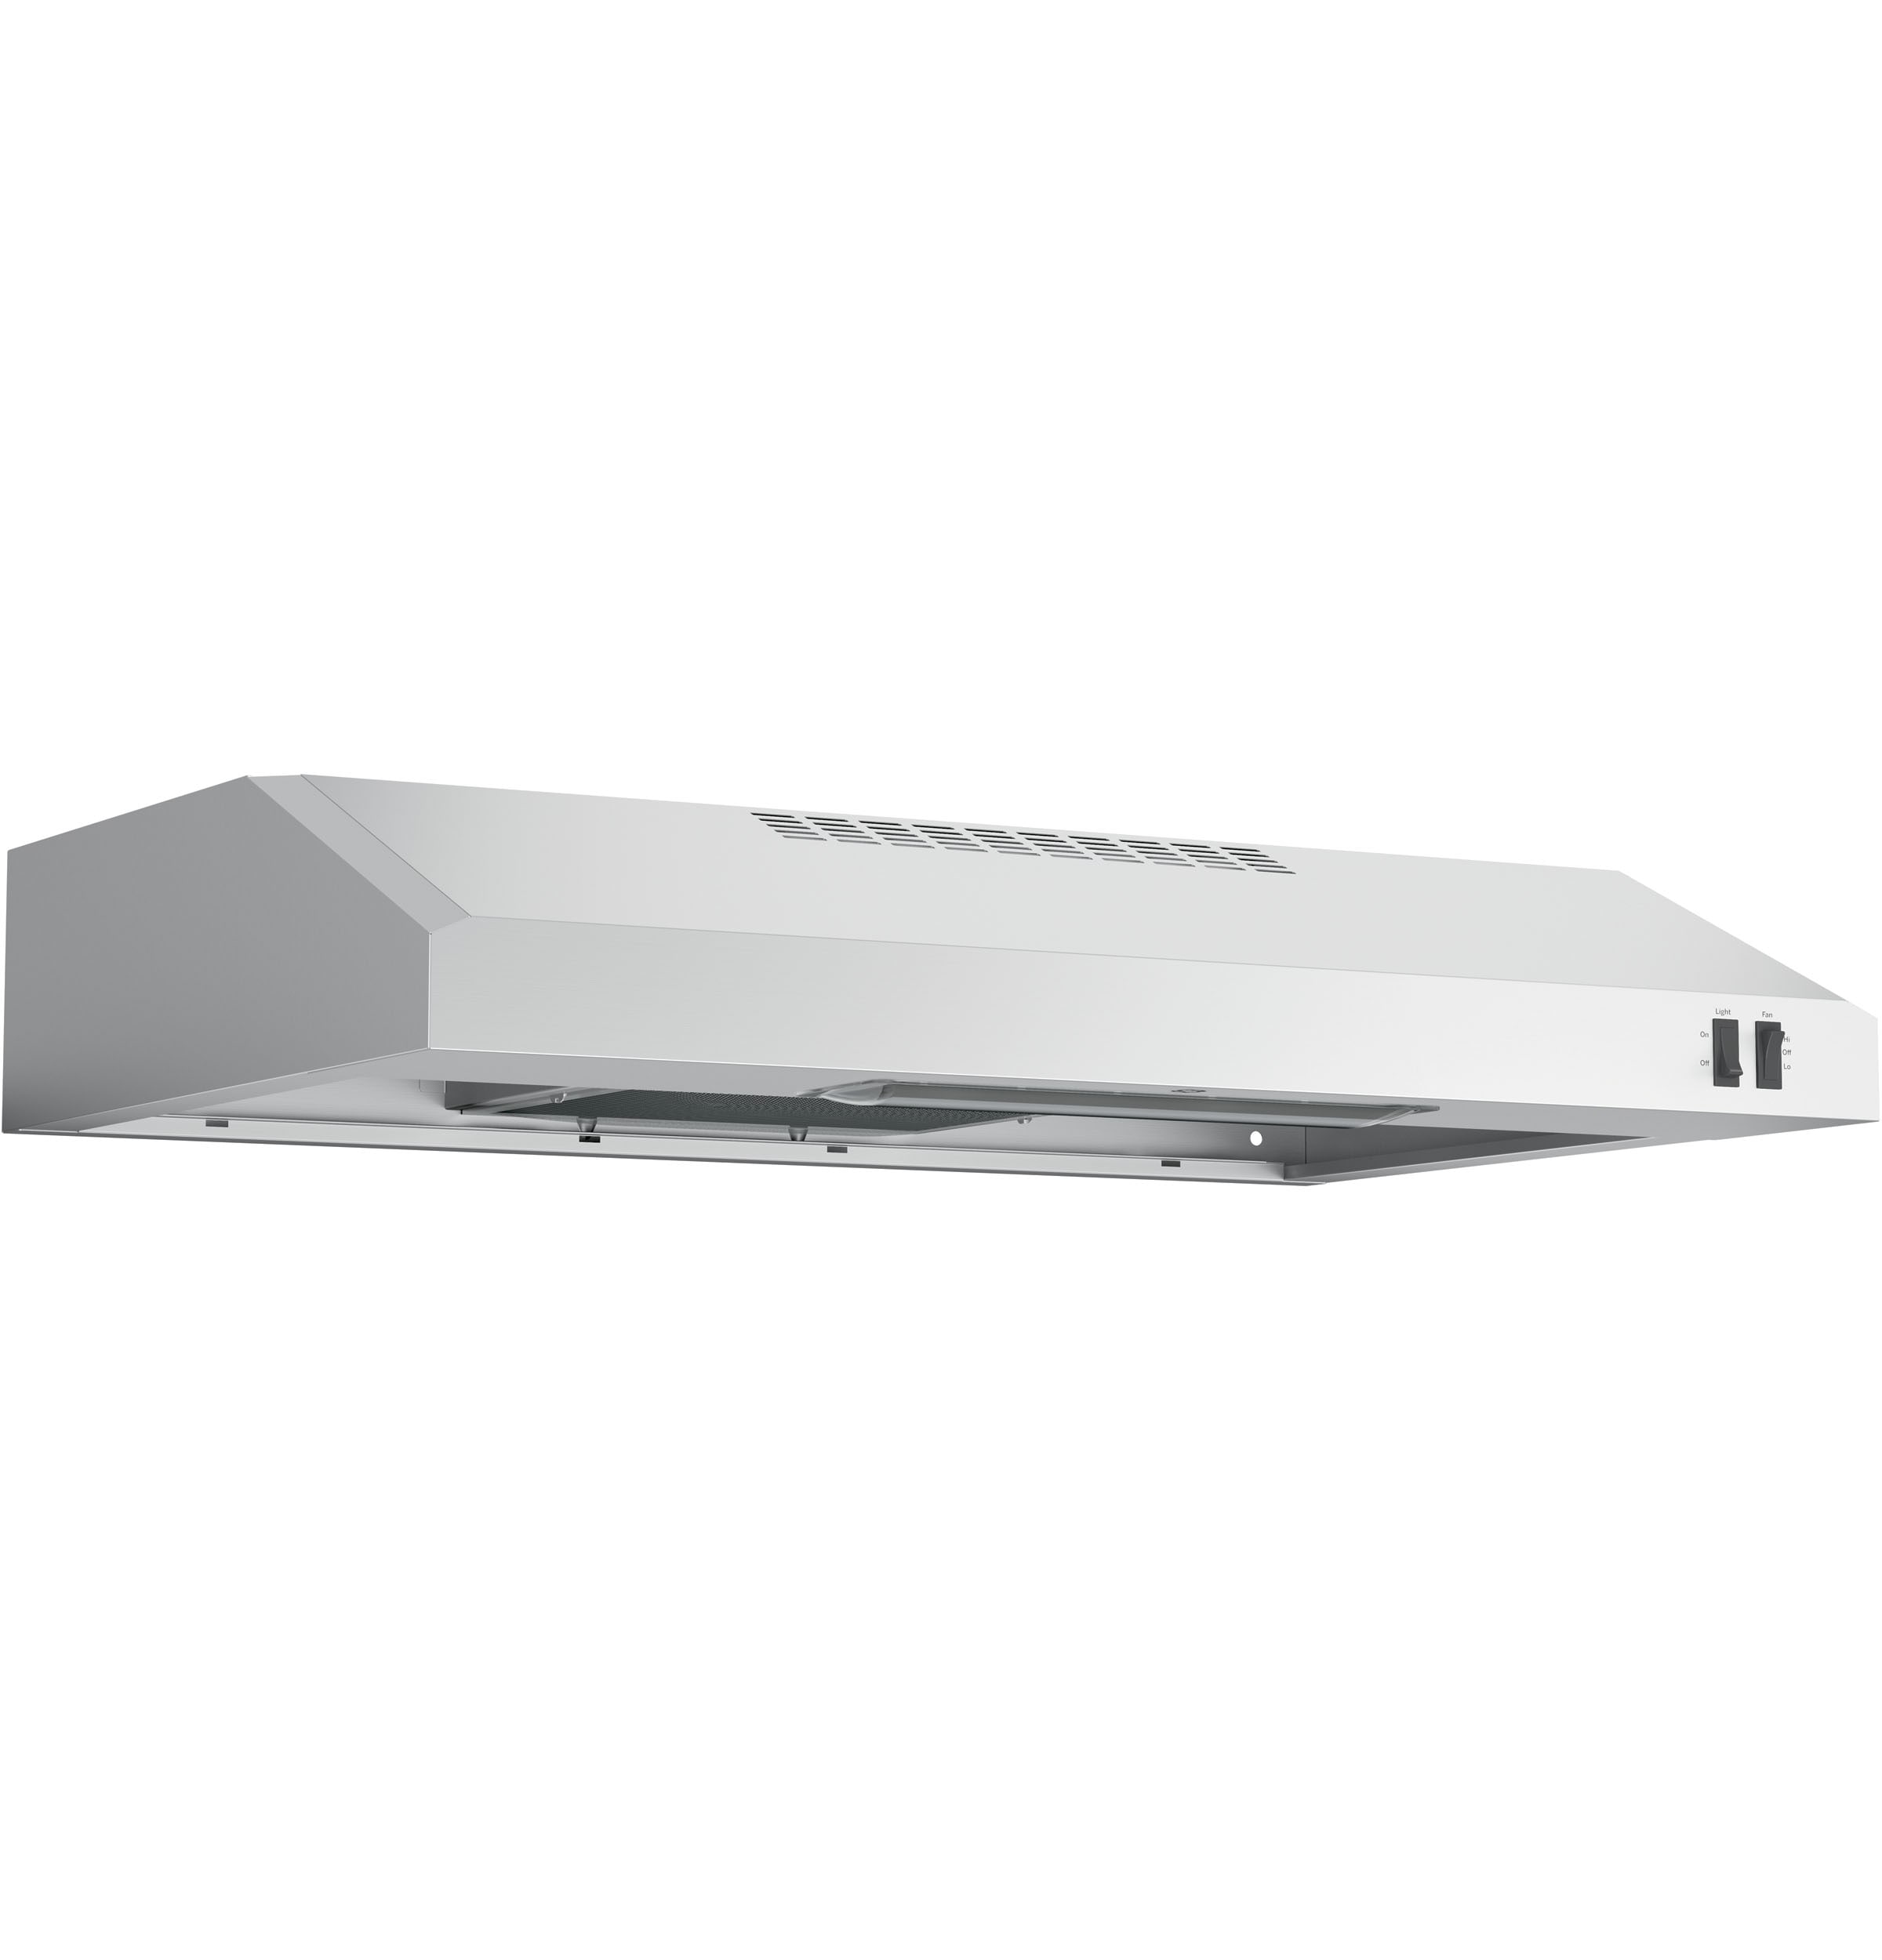  Stainless Steel Range Hood 30 inch KITCHENEXUS 200 CFM Under  Cabinet Range Hood Ducted/Ductless Convertible Duct with LED Lighting,  Reusable Filters and 3 Speed Exhaust Fan, Slim Kitchen Hood Vent :  Appliances